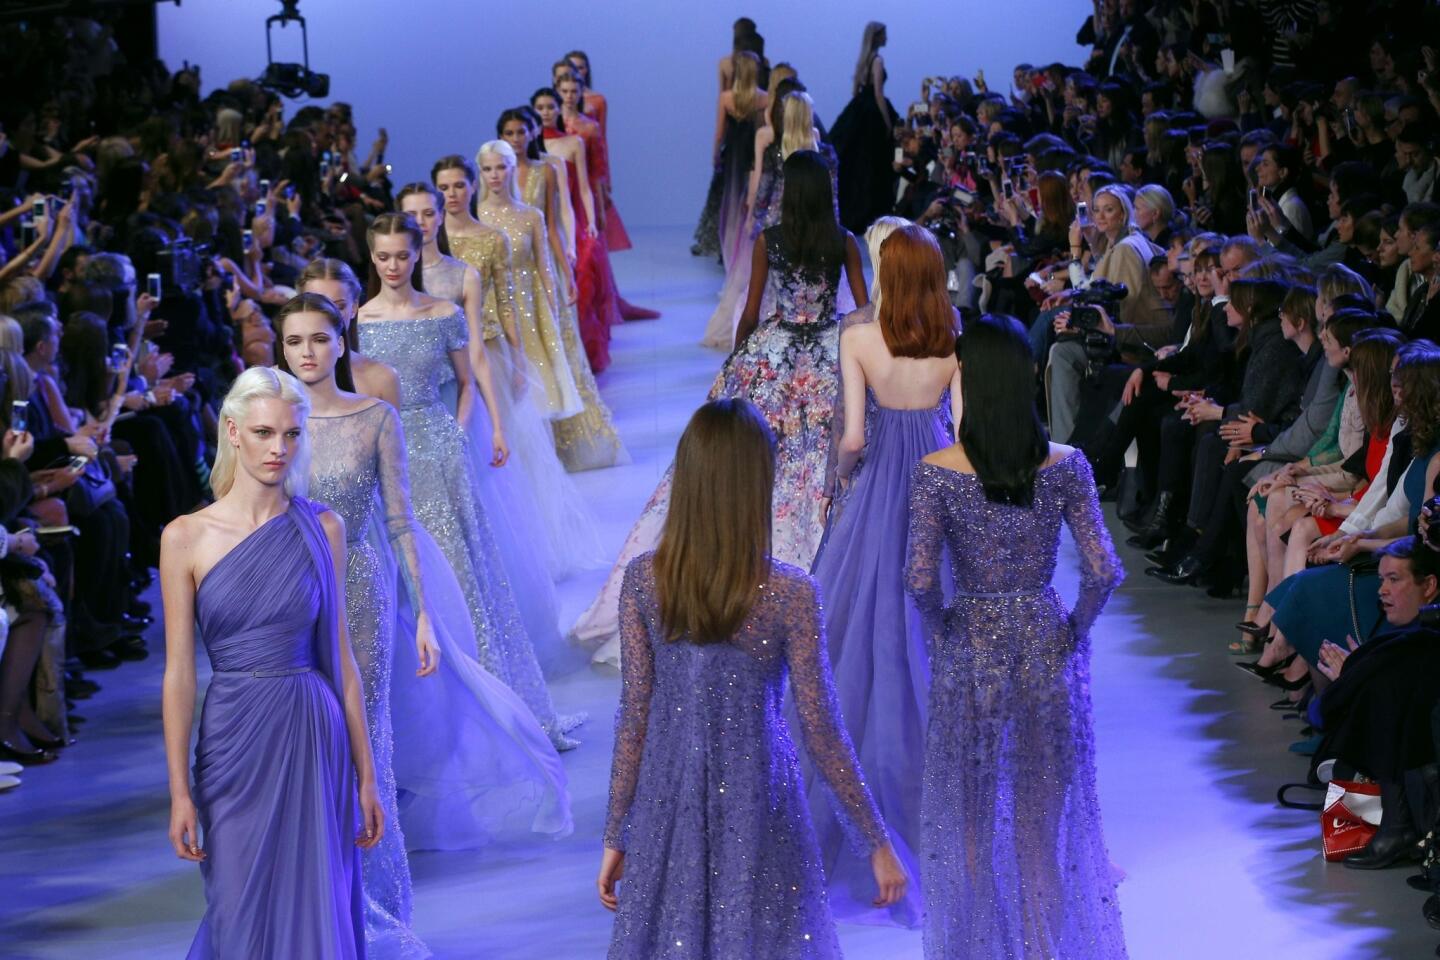 Elie Saab 2014 spring/summer haute couture collection